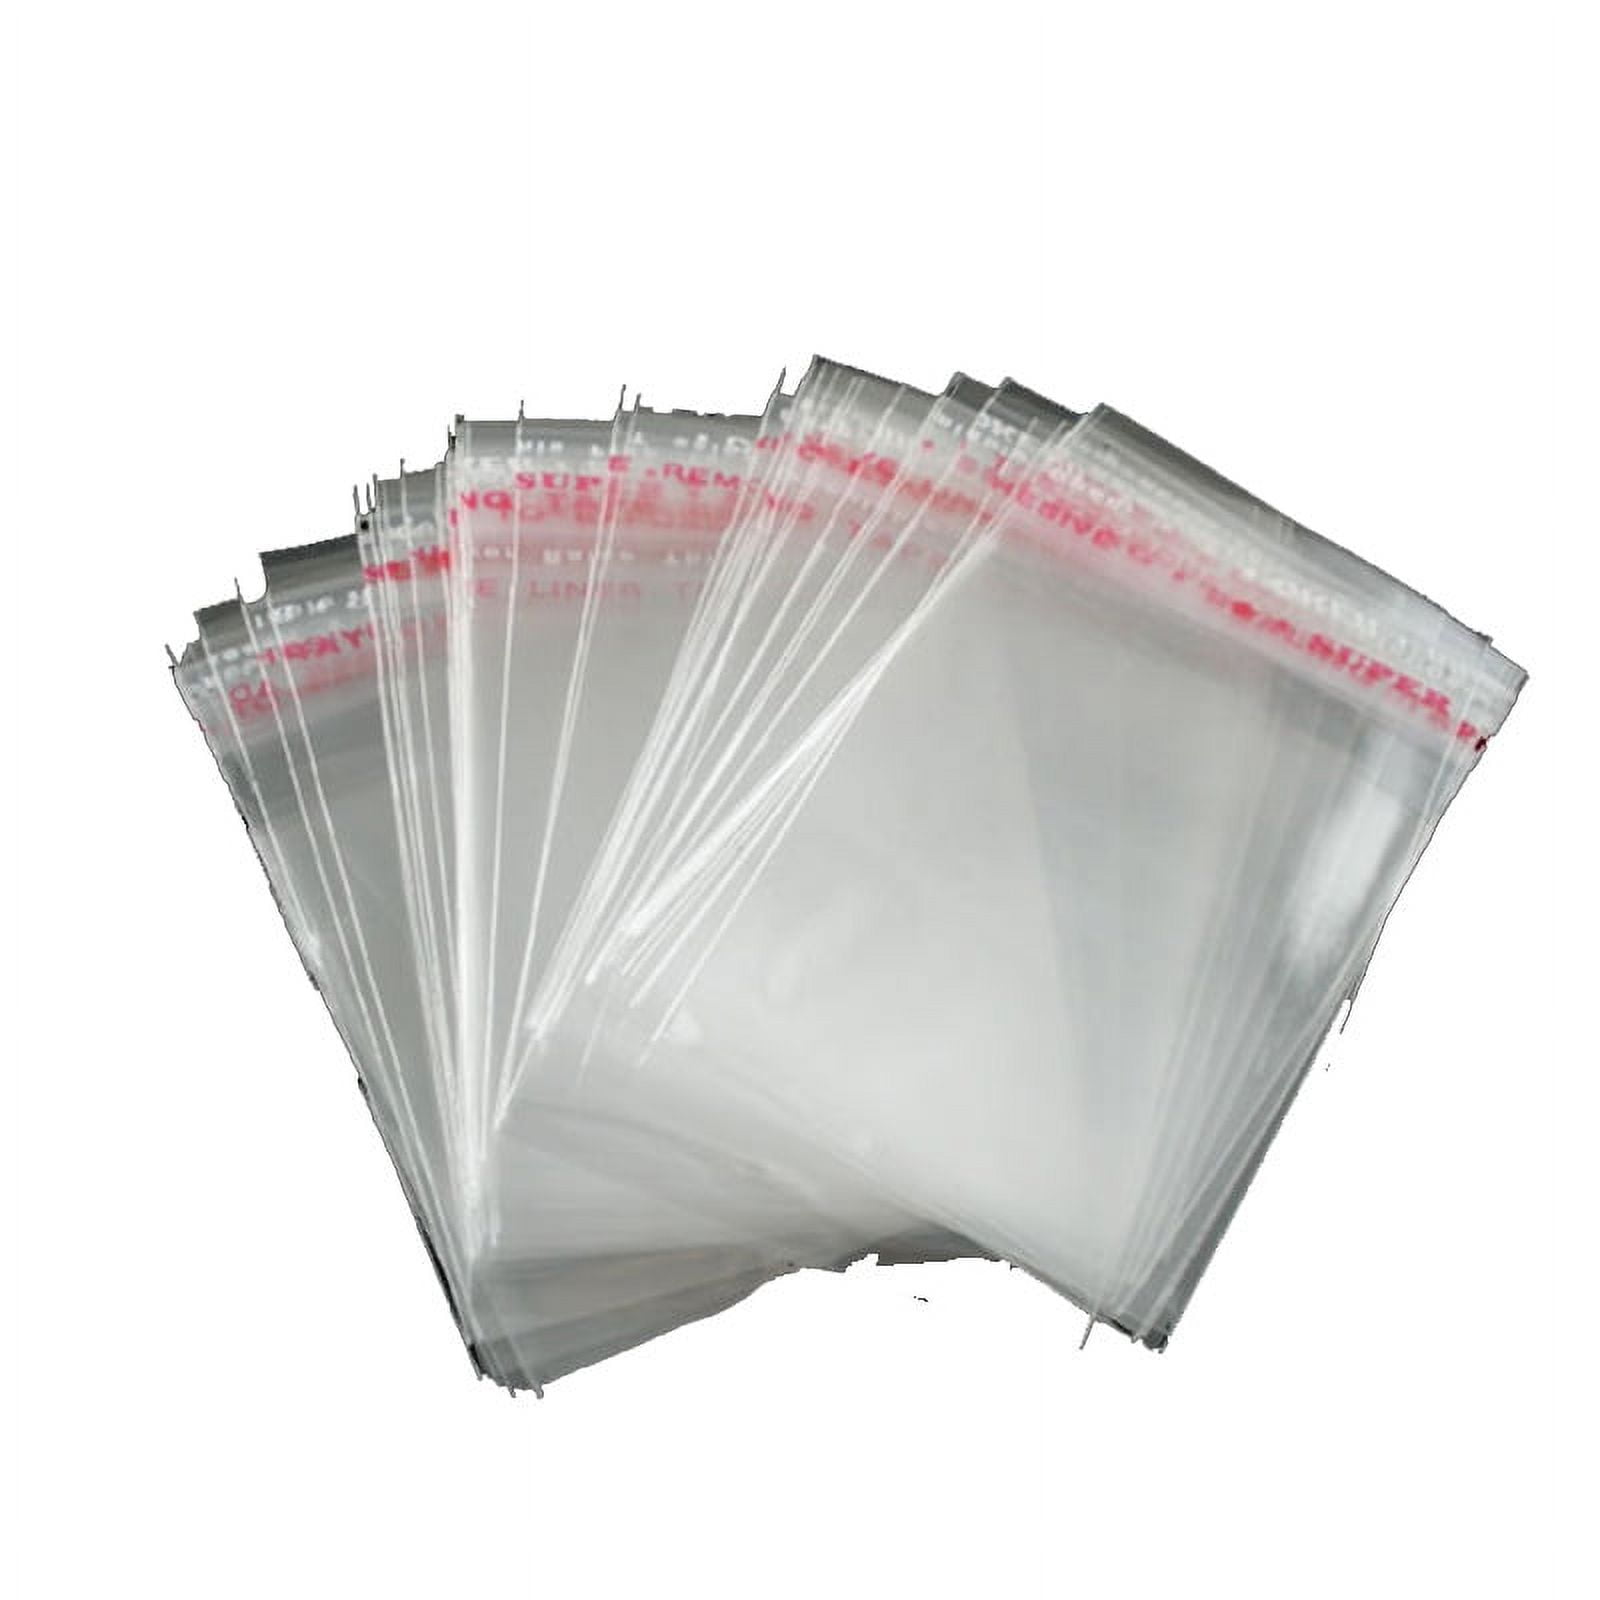  Cellophane Bags 9x12, 200Pcs Clear Bags for Gifts